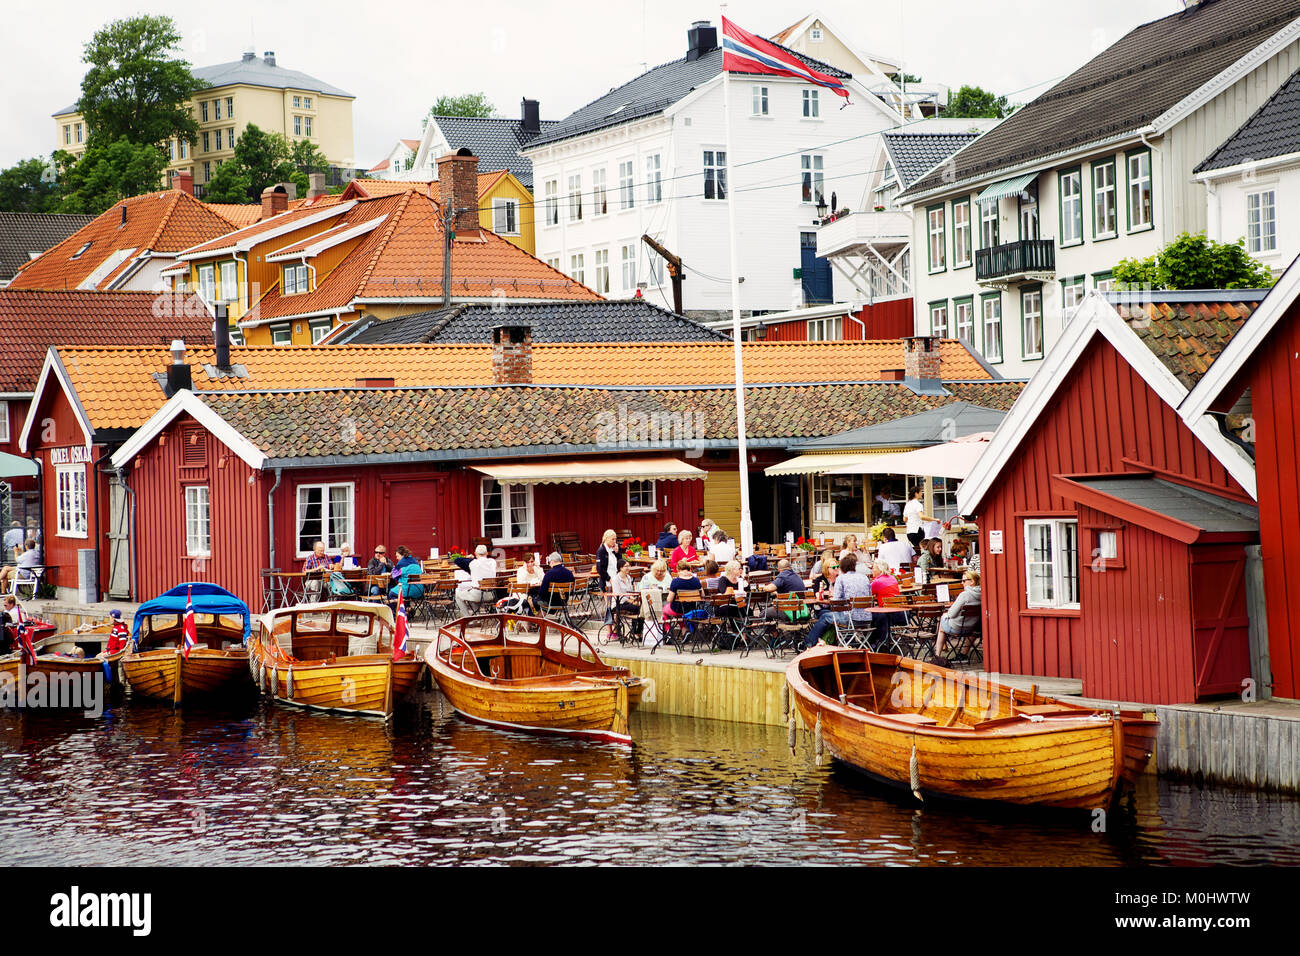 Tourists are sitting and enjoying themselves in an outdoor waterside cafe in fishing town Kragero, Norway. Stock Photo